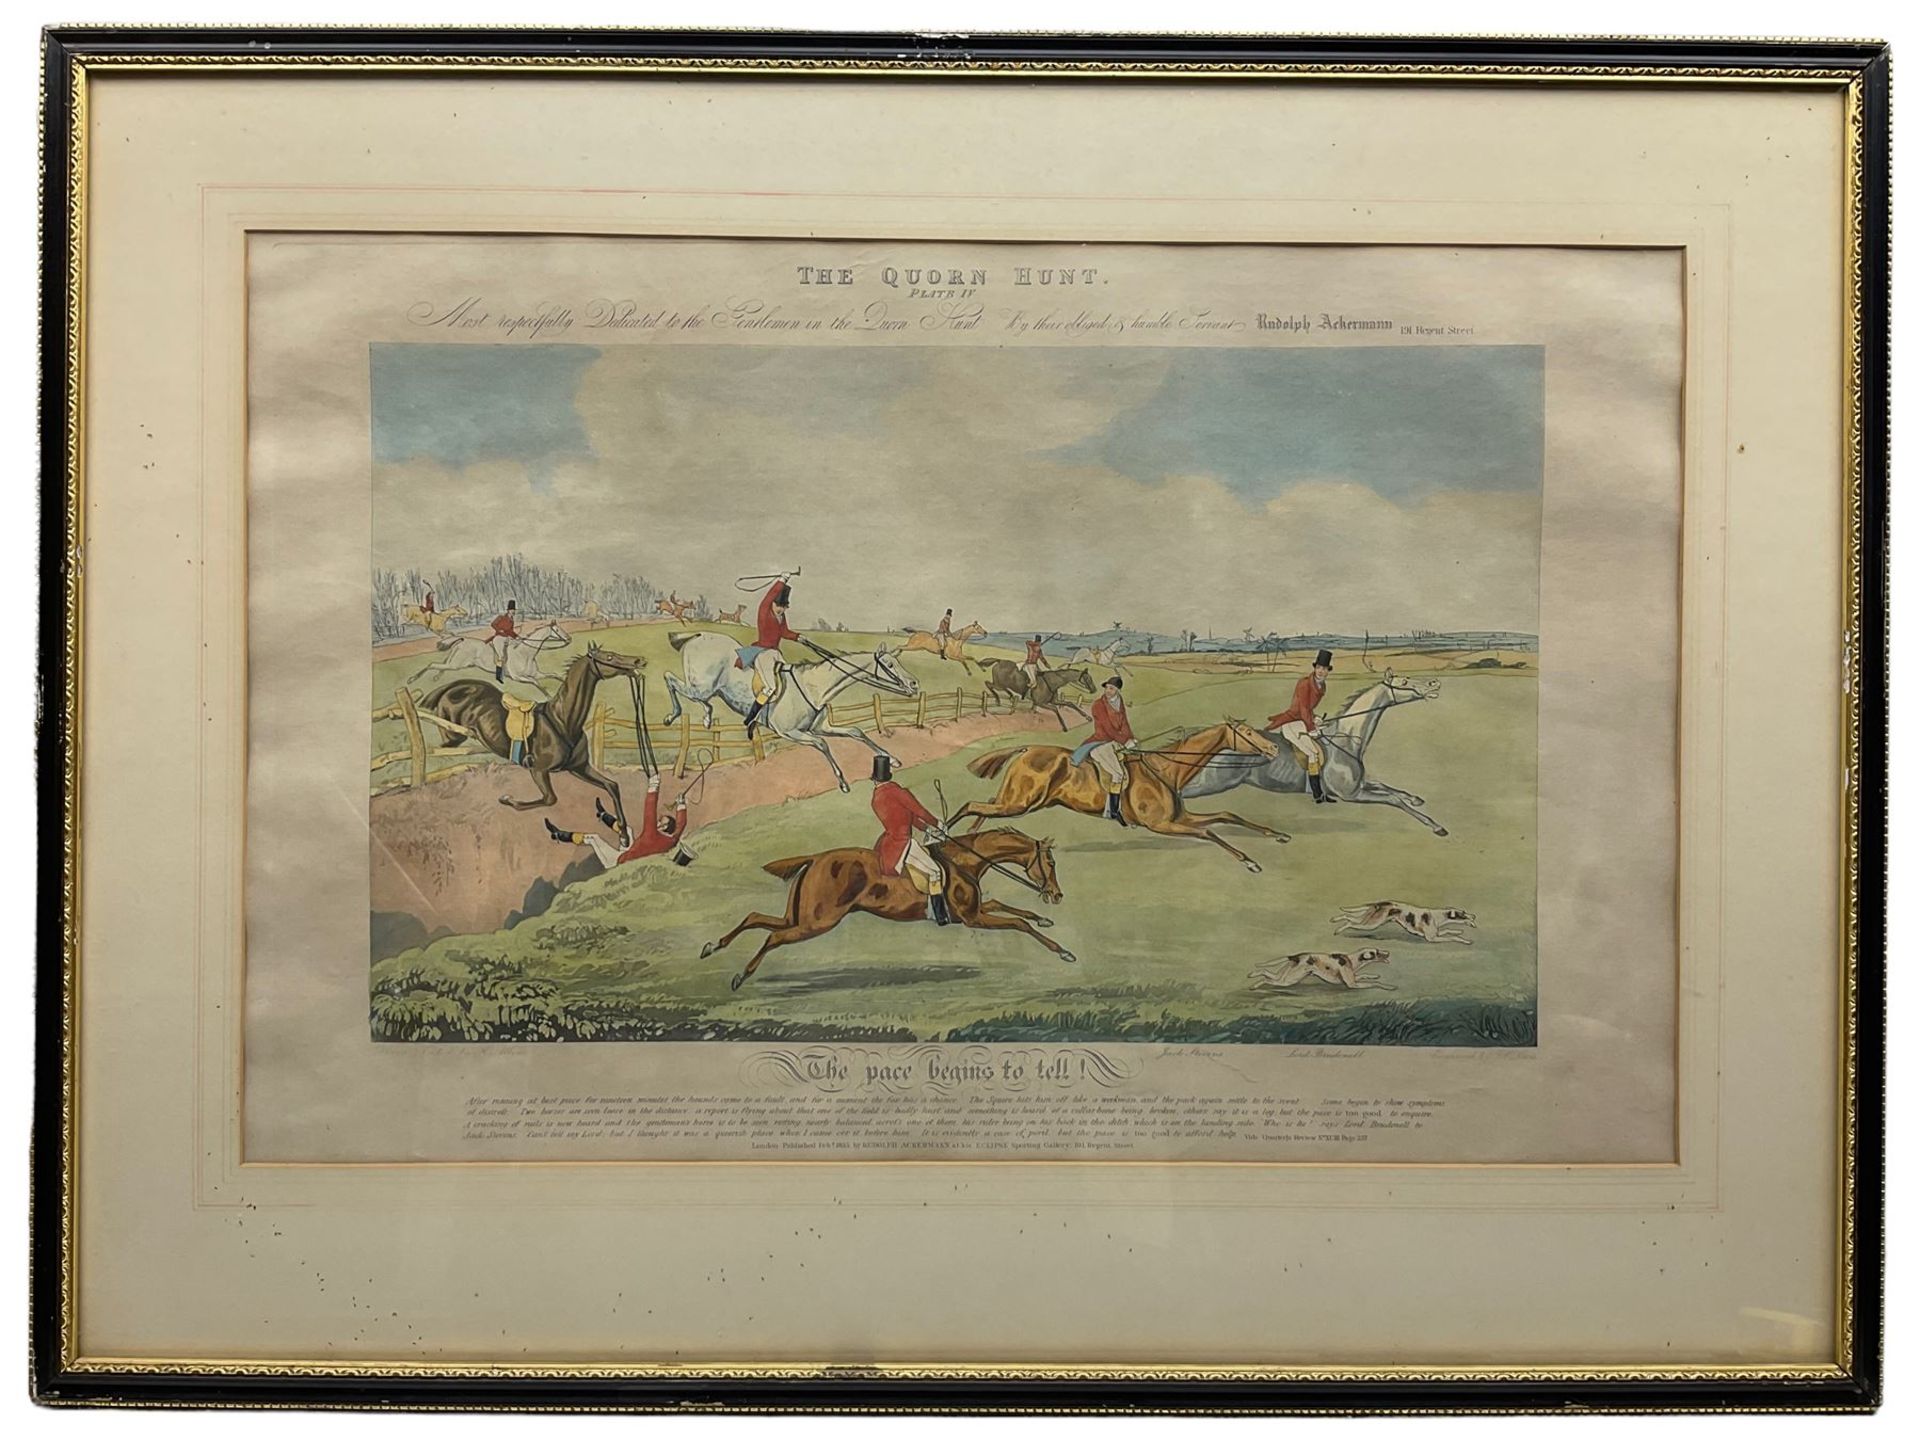 Frederick Christian Lewis (British 1779-1856) after Henry Alken (British 1785-1851): The Quorn - Image 5 of 5